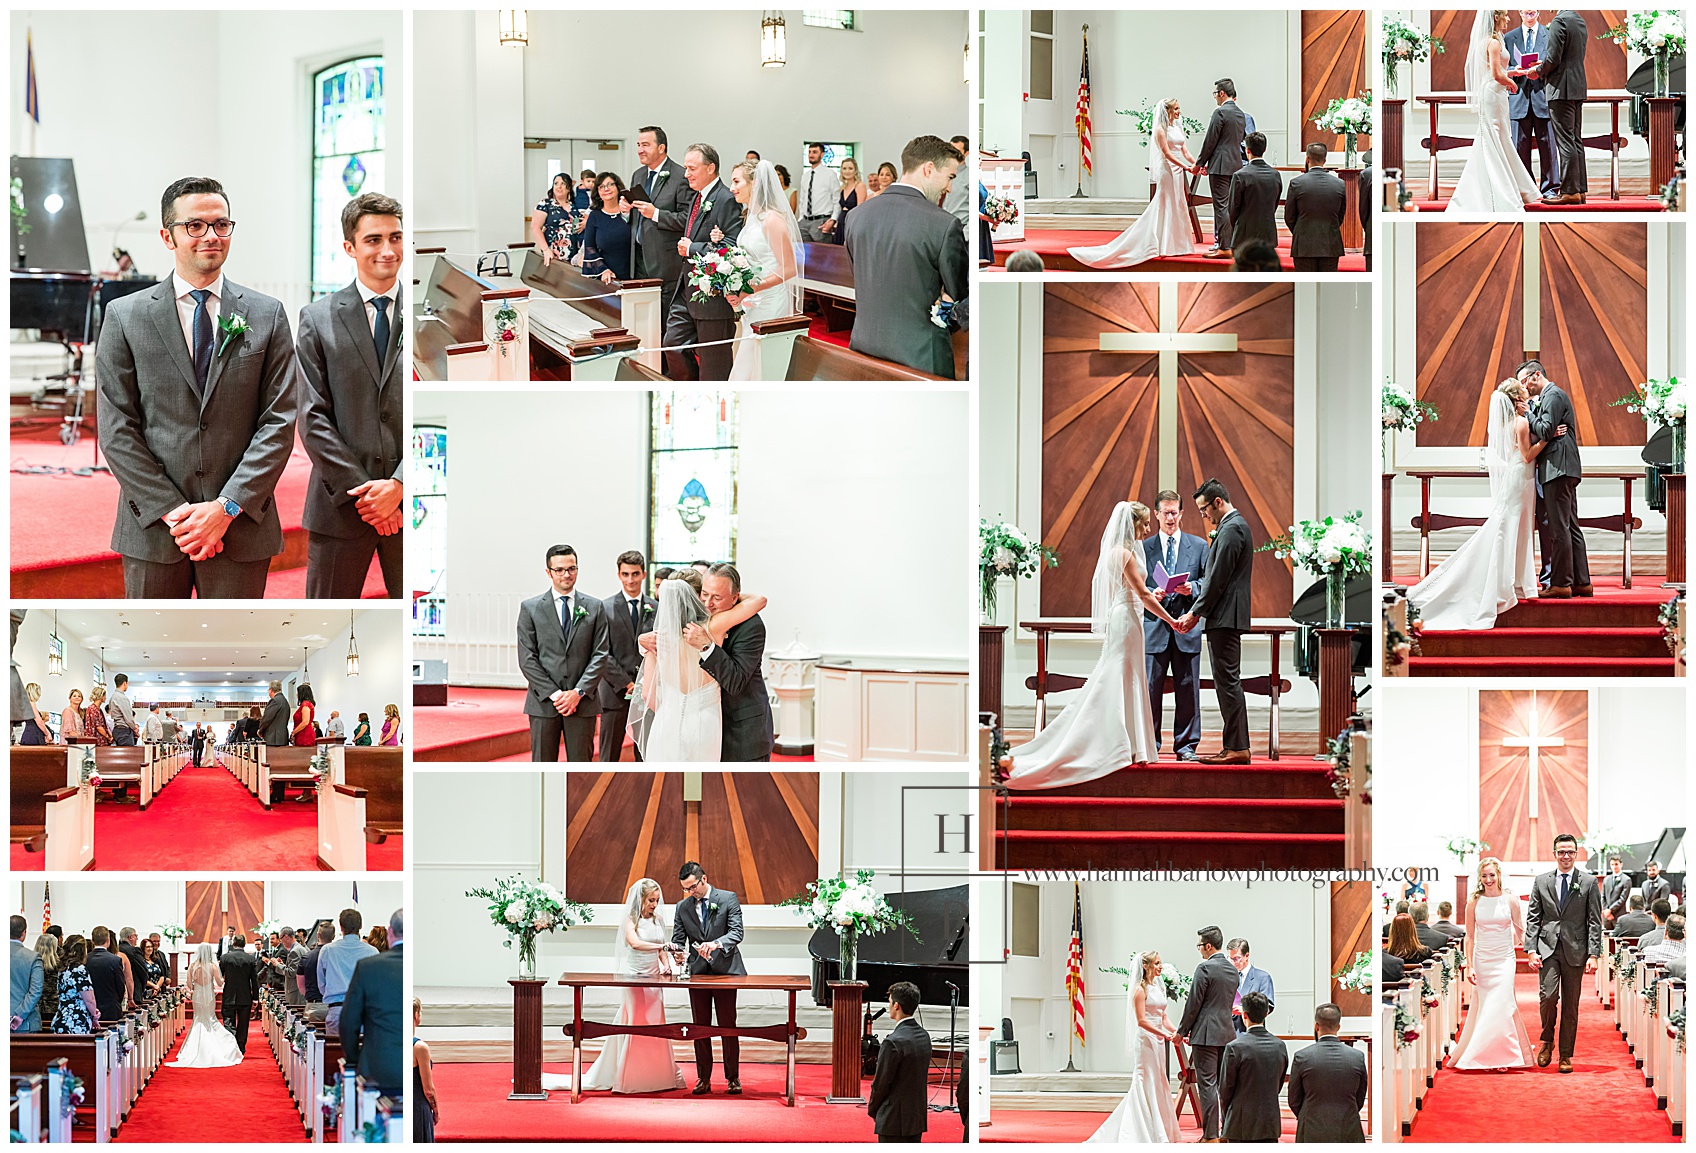 Wedding Ceremony at First Presbyterian Church in Bakerstown